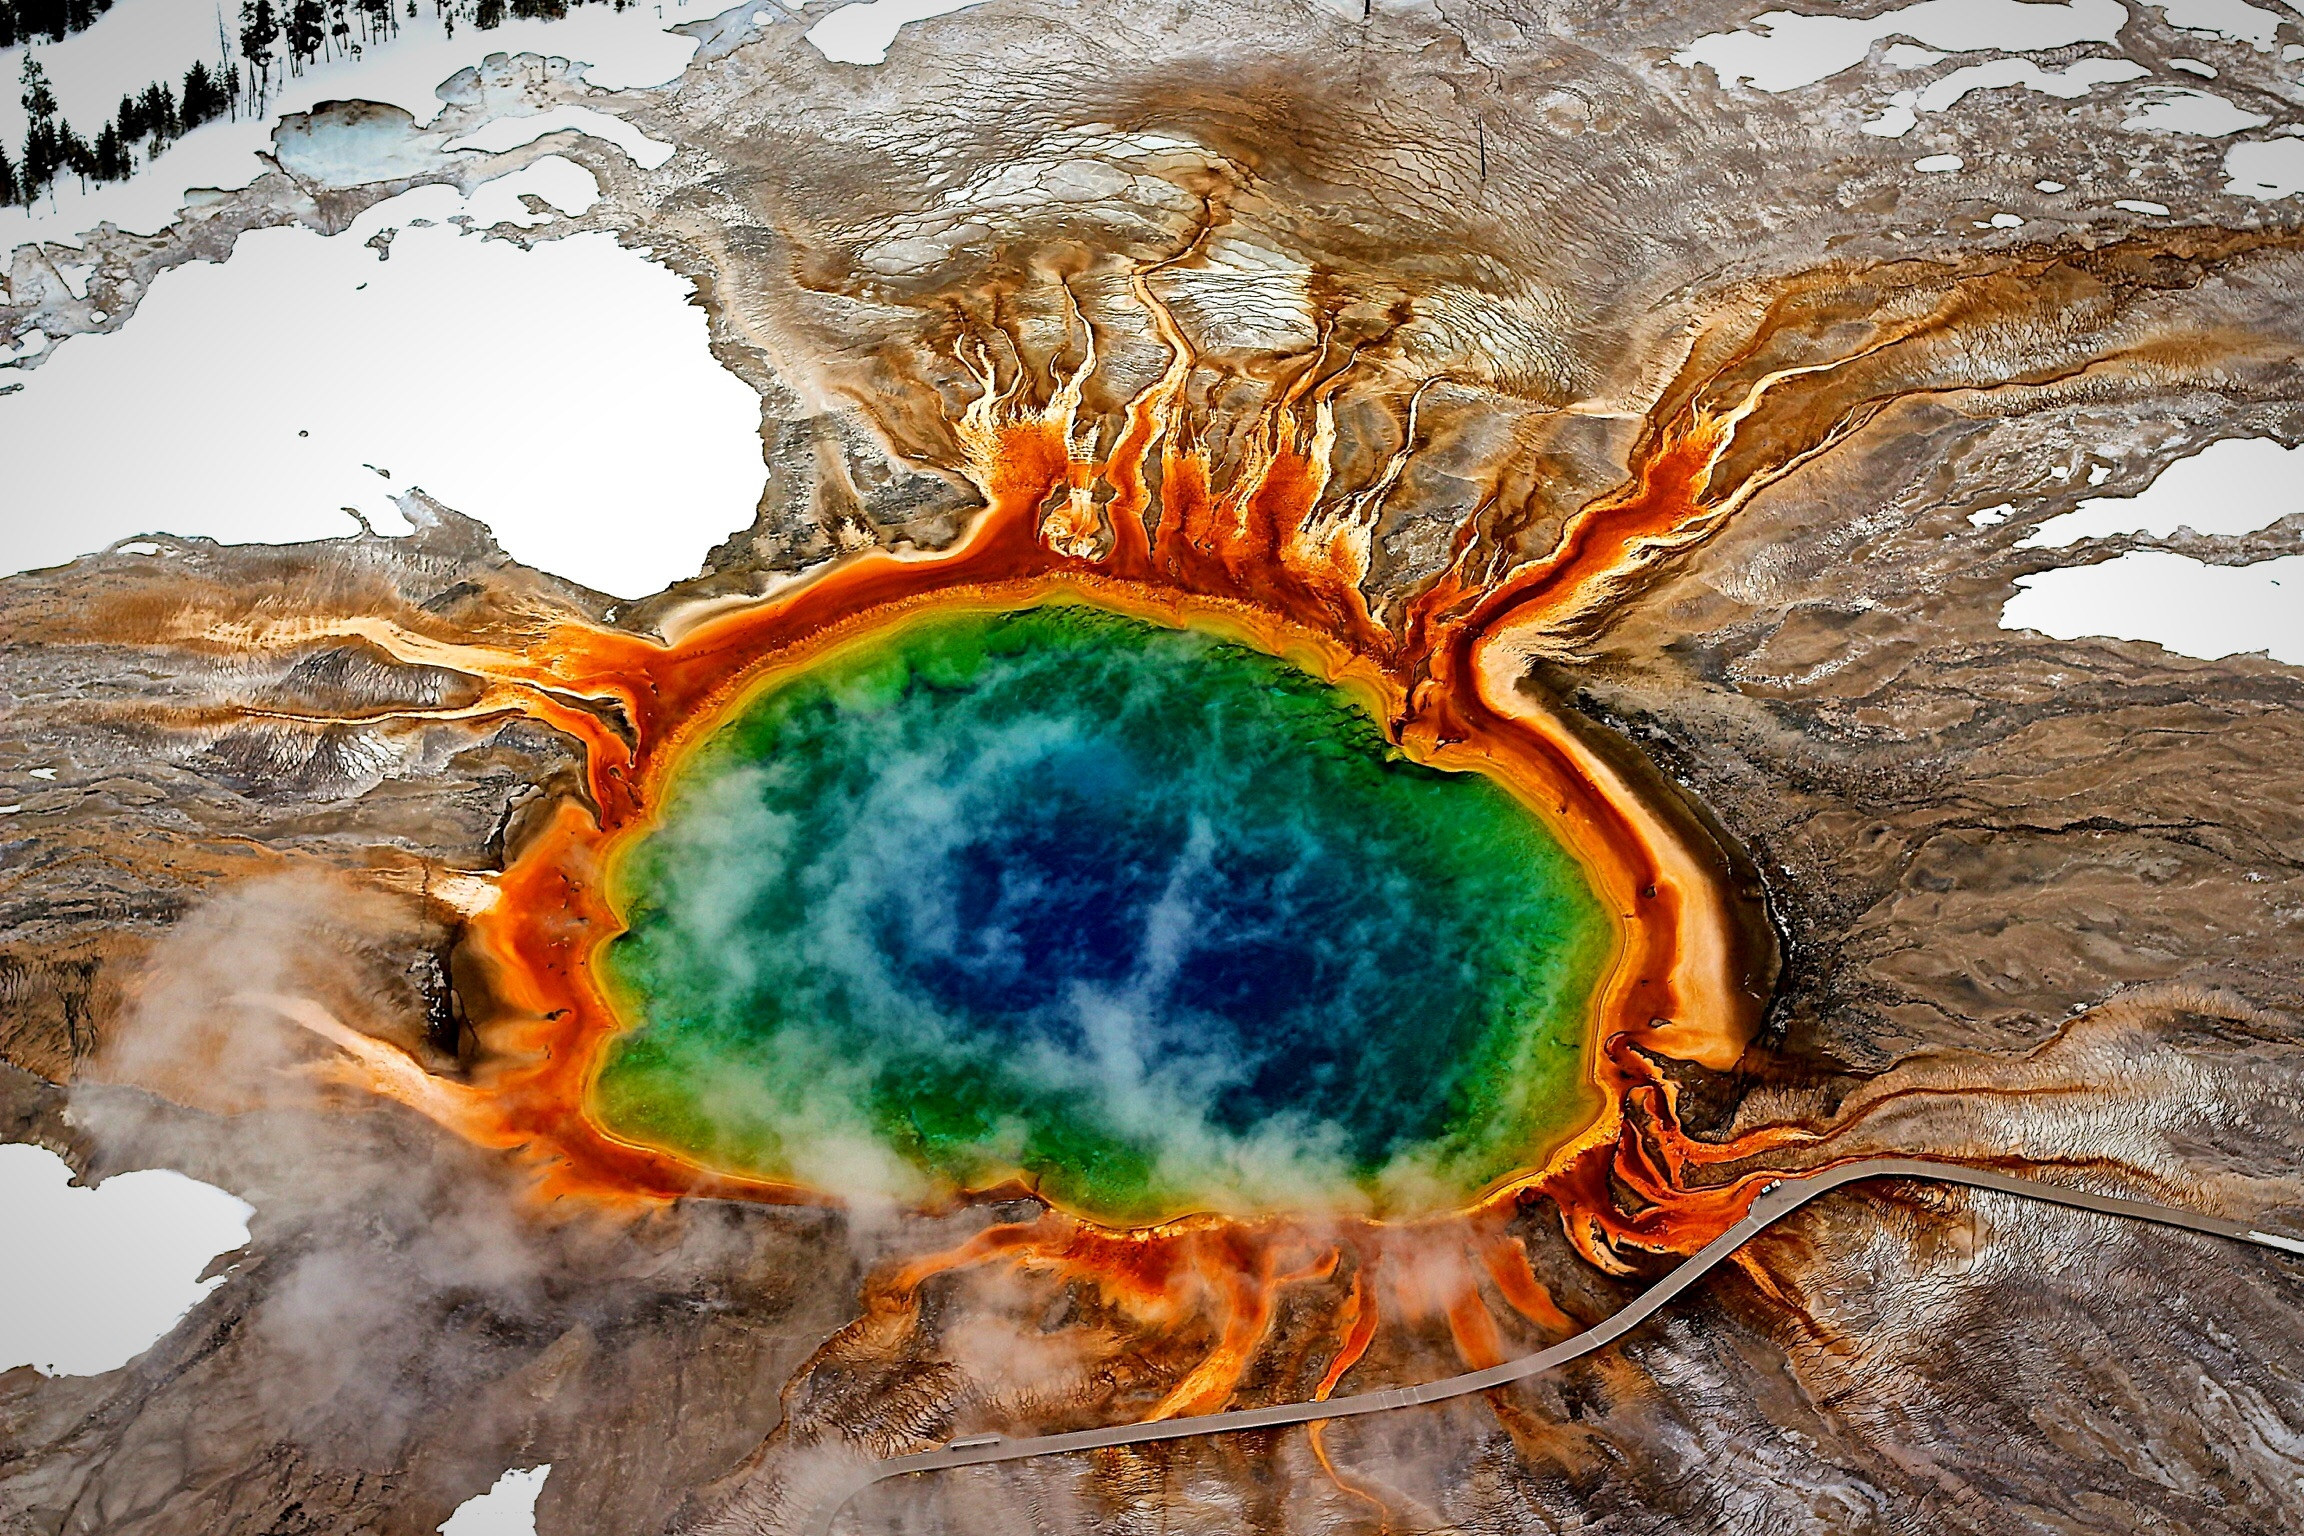 Aerial view of the geyser in Yellowstone National Park.